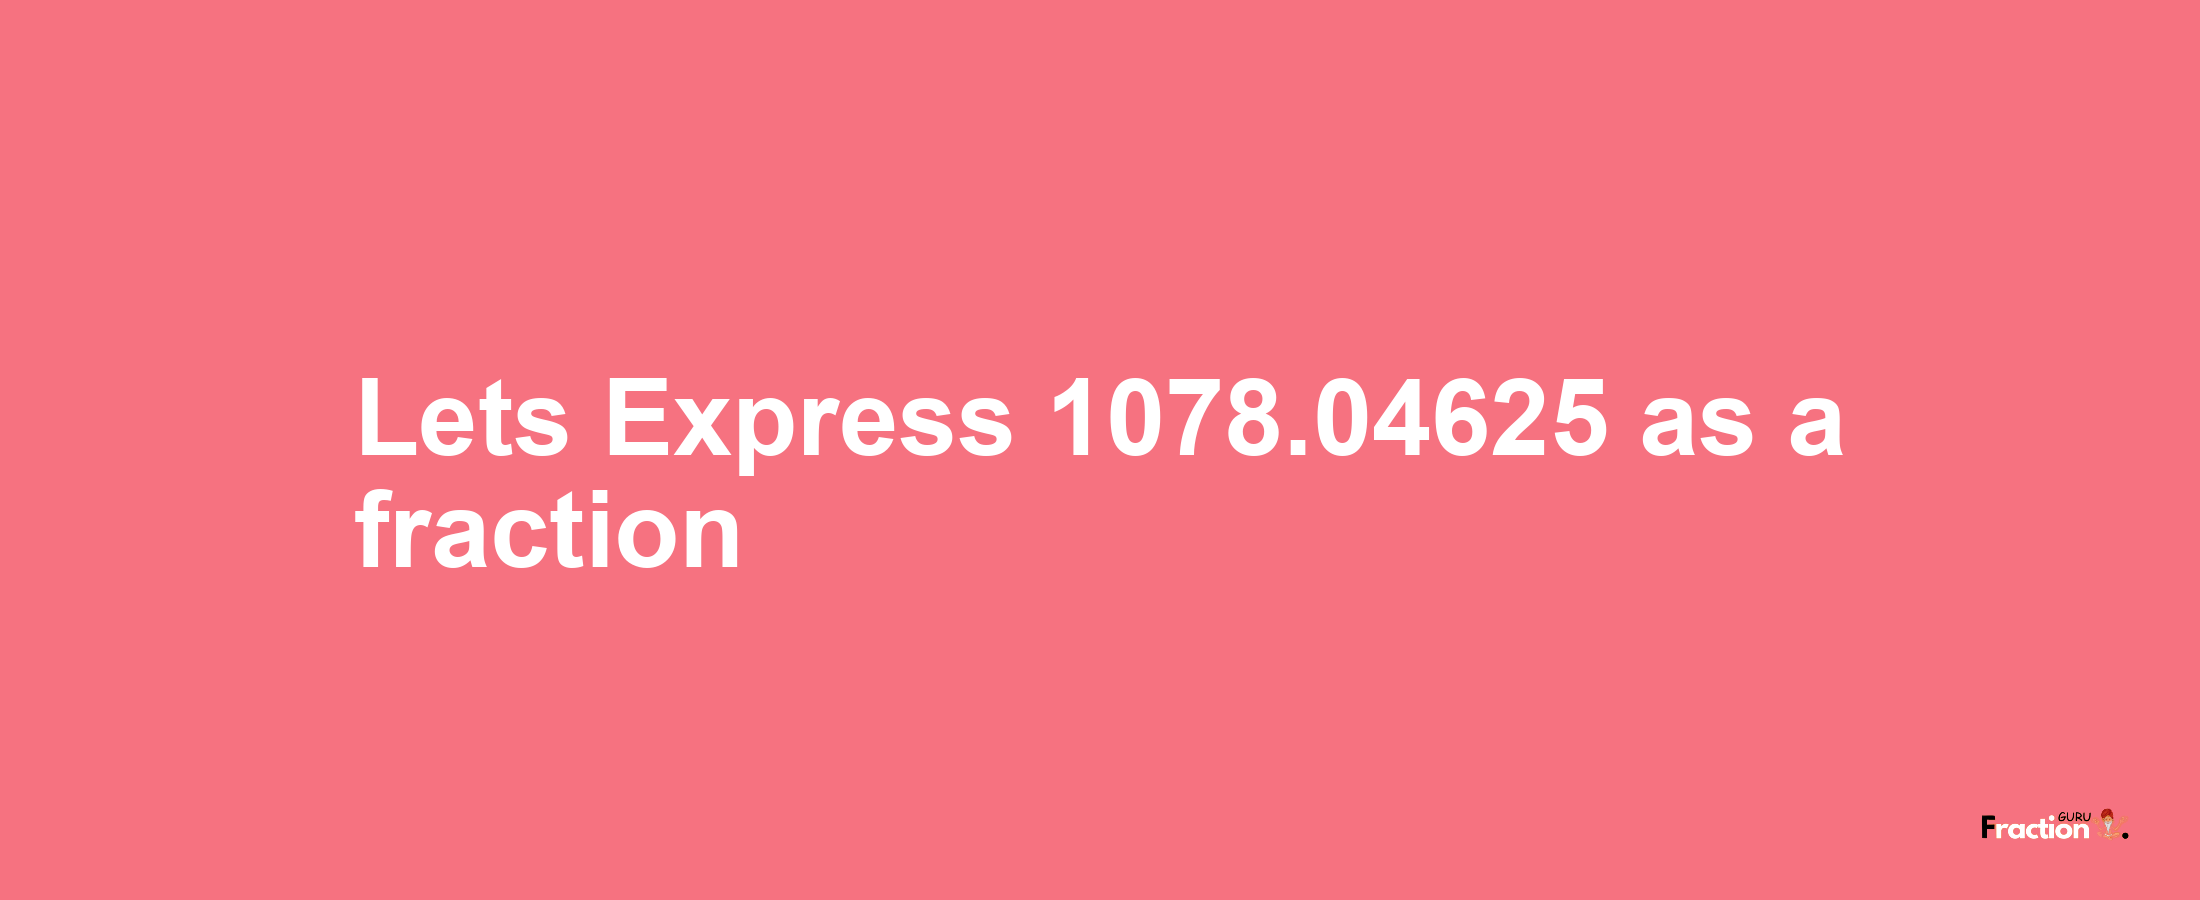 Lets Express 1078.04625 as afraction